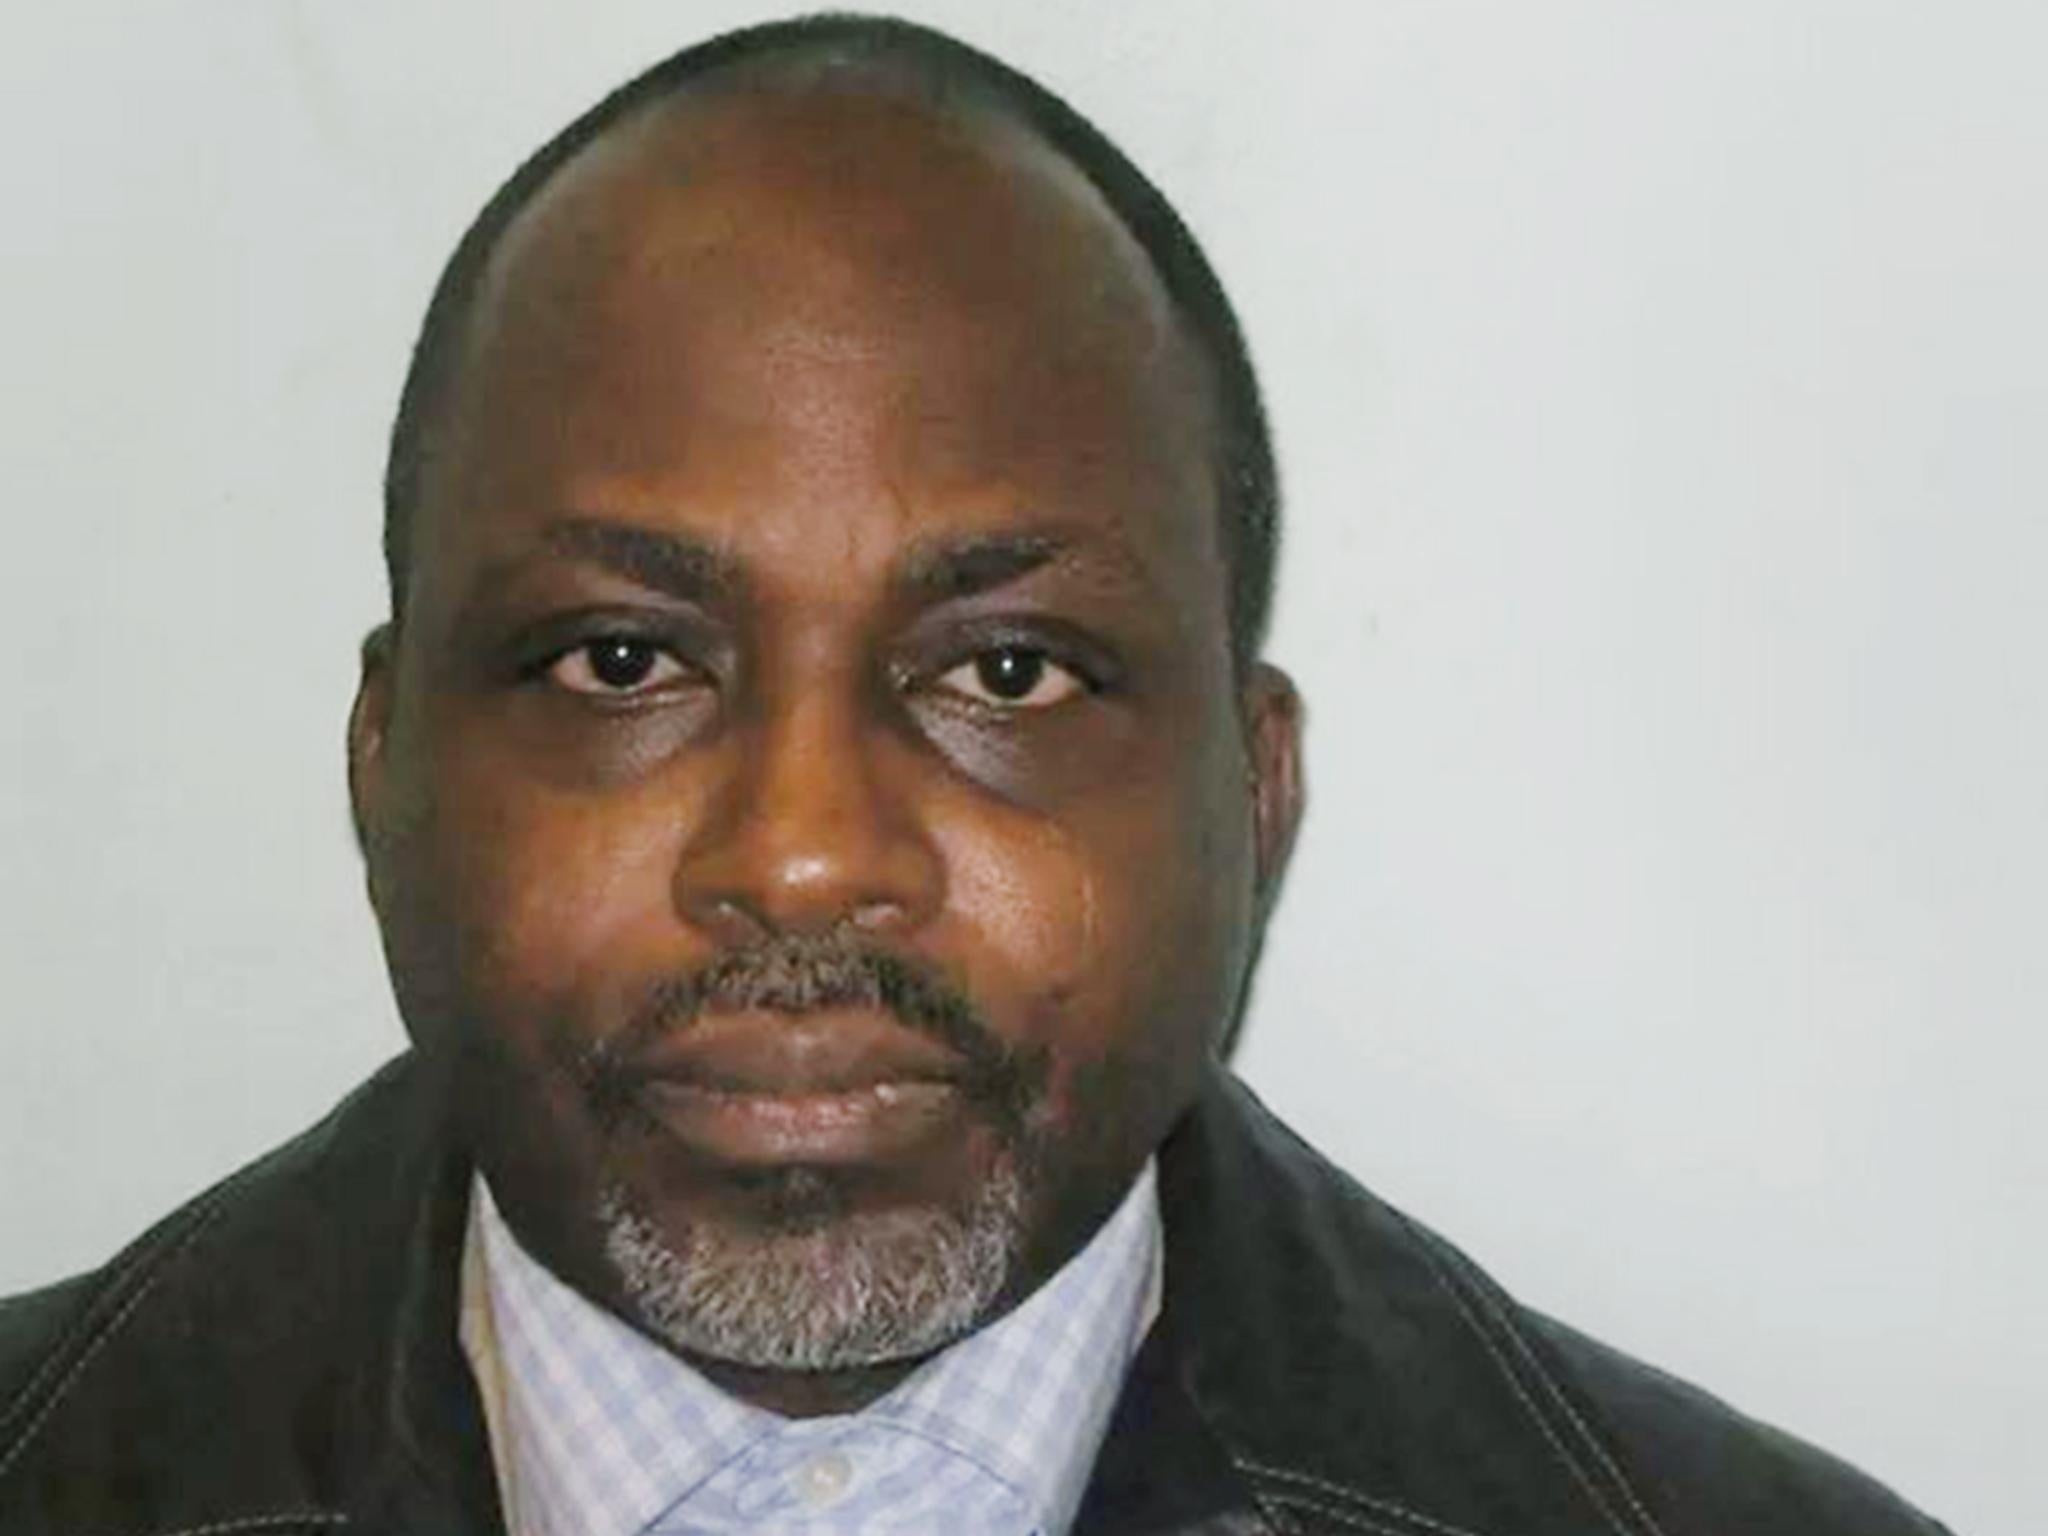 Benjamin Egbujor has been sentenced to three years and four months in prison